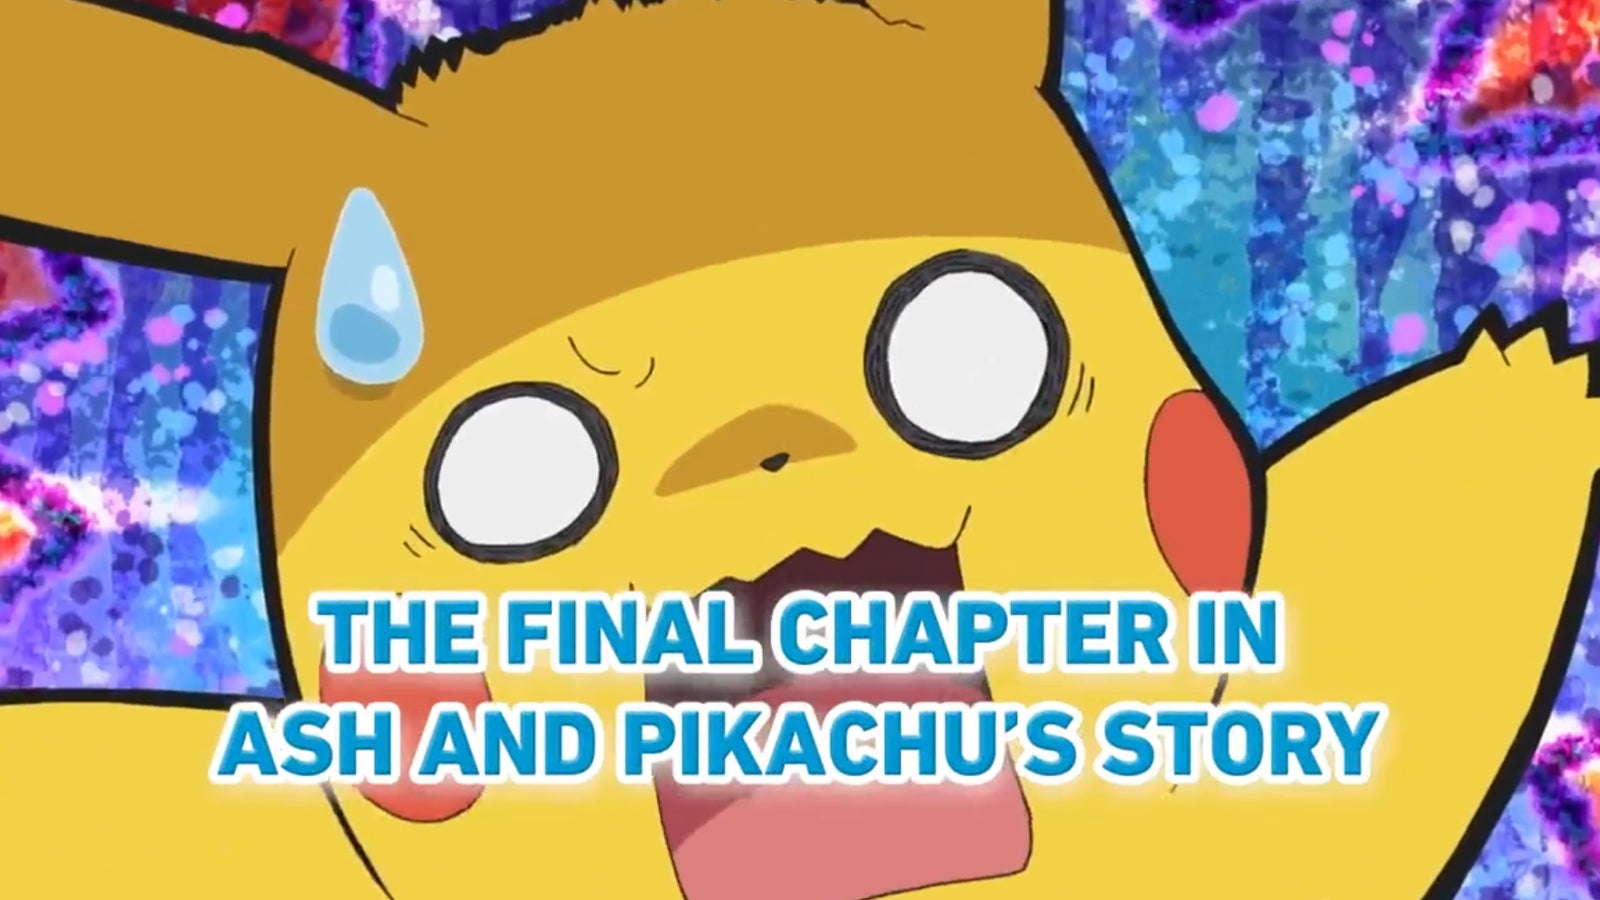 Ash and Pikachu to depart Pokémon series after 25 years 